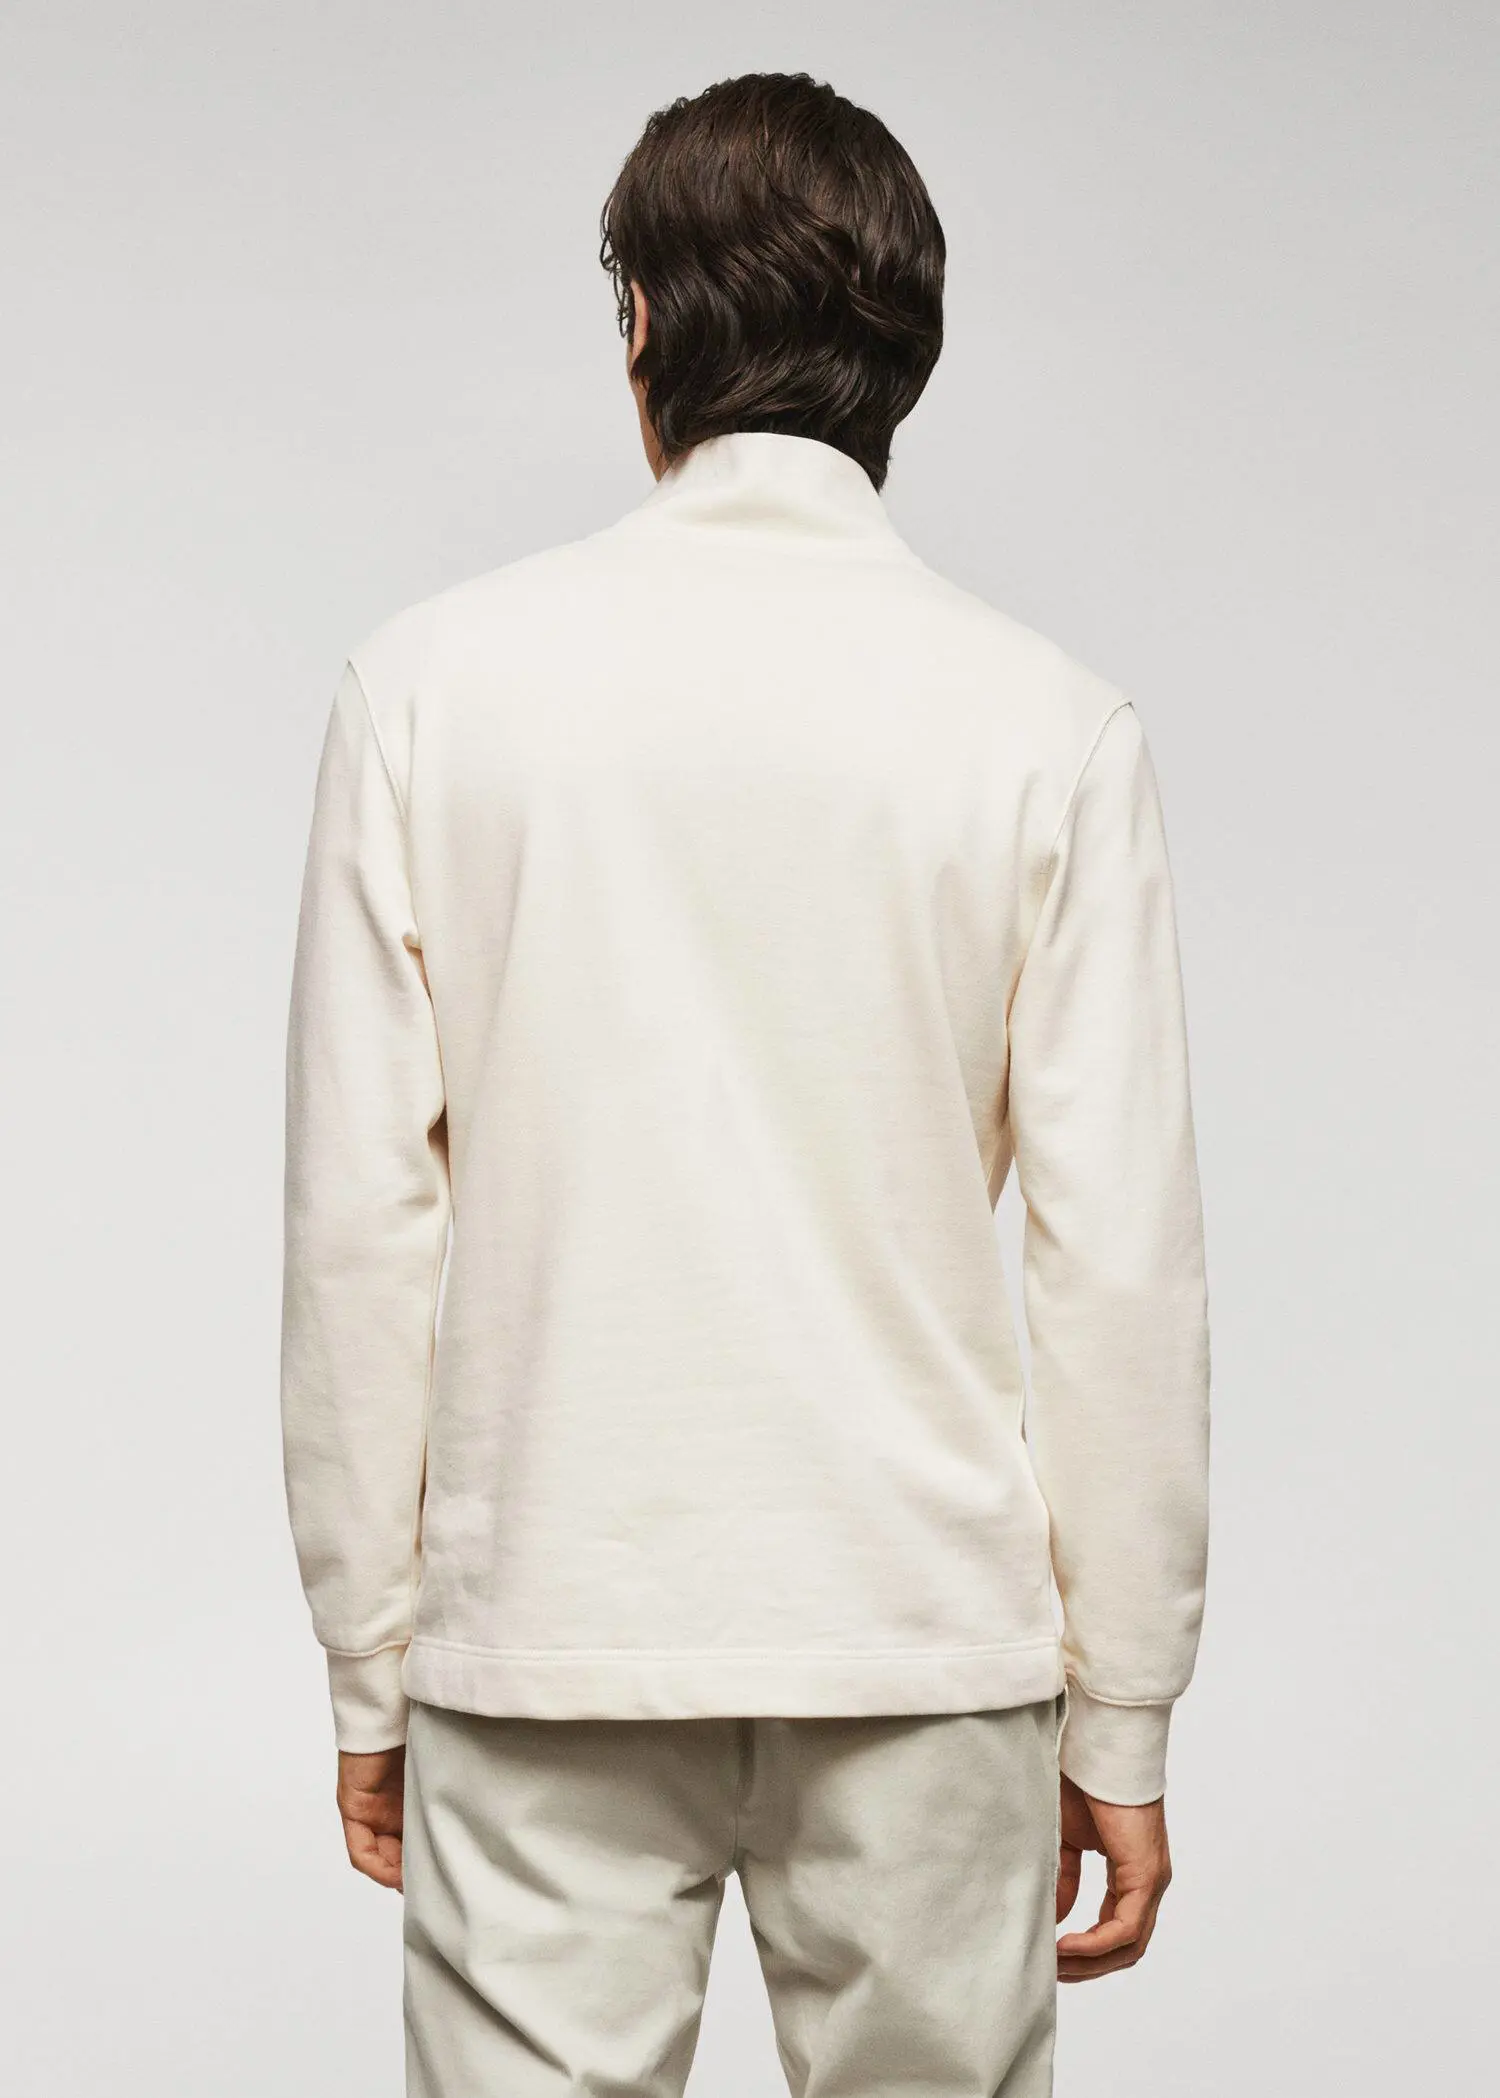 Mango Cotton sweatshirt with zip neck. a man wearing a white jacket standing in front of a white wall. 